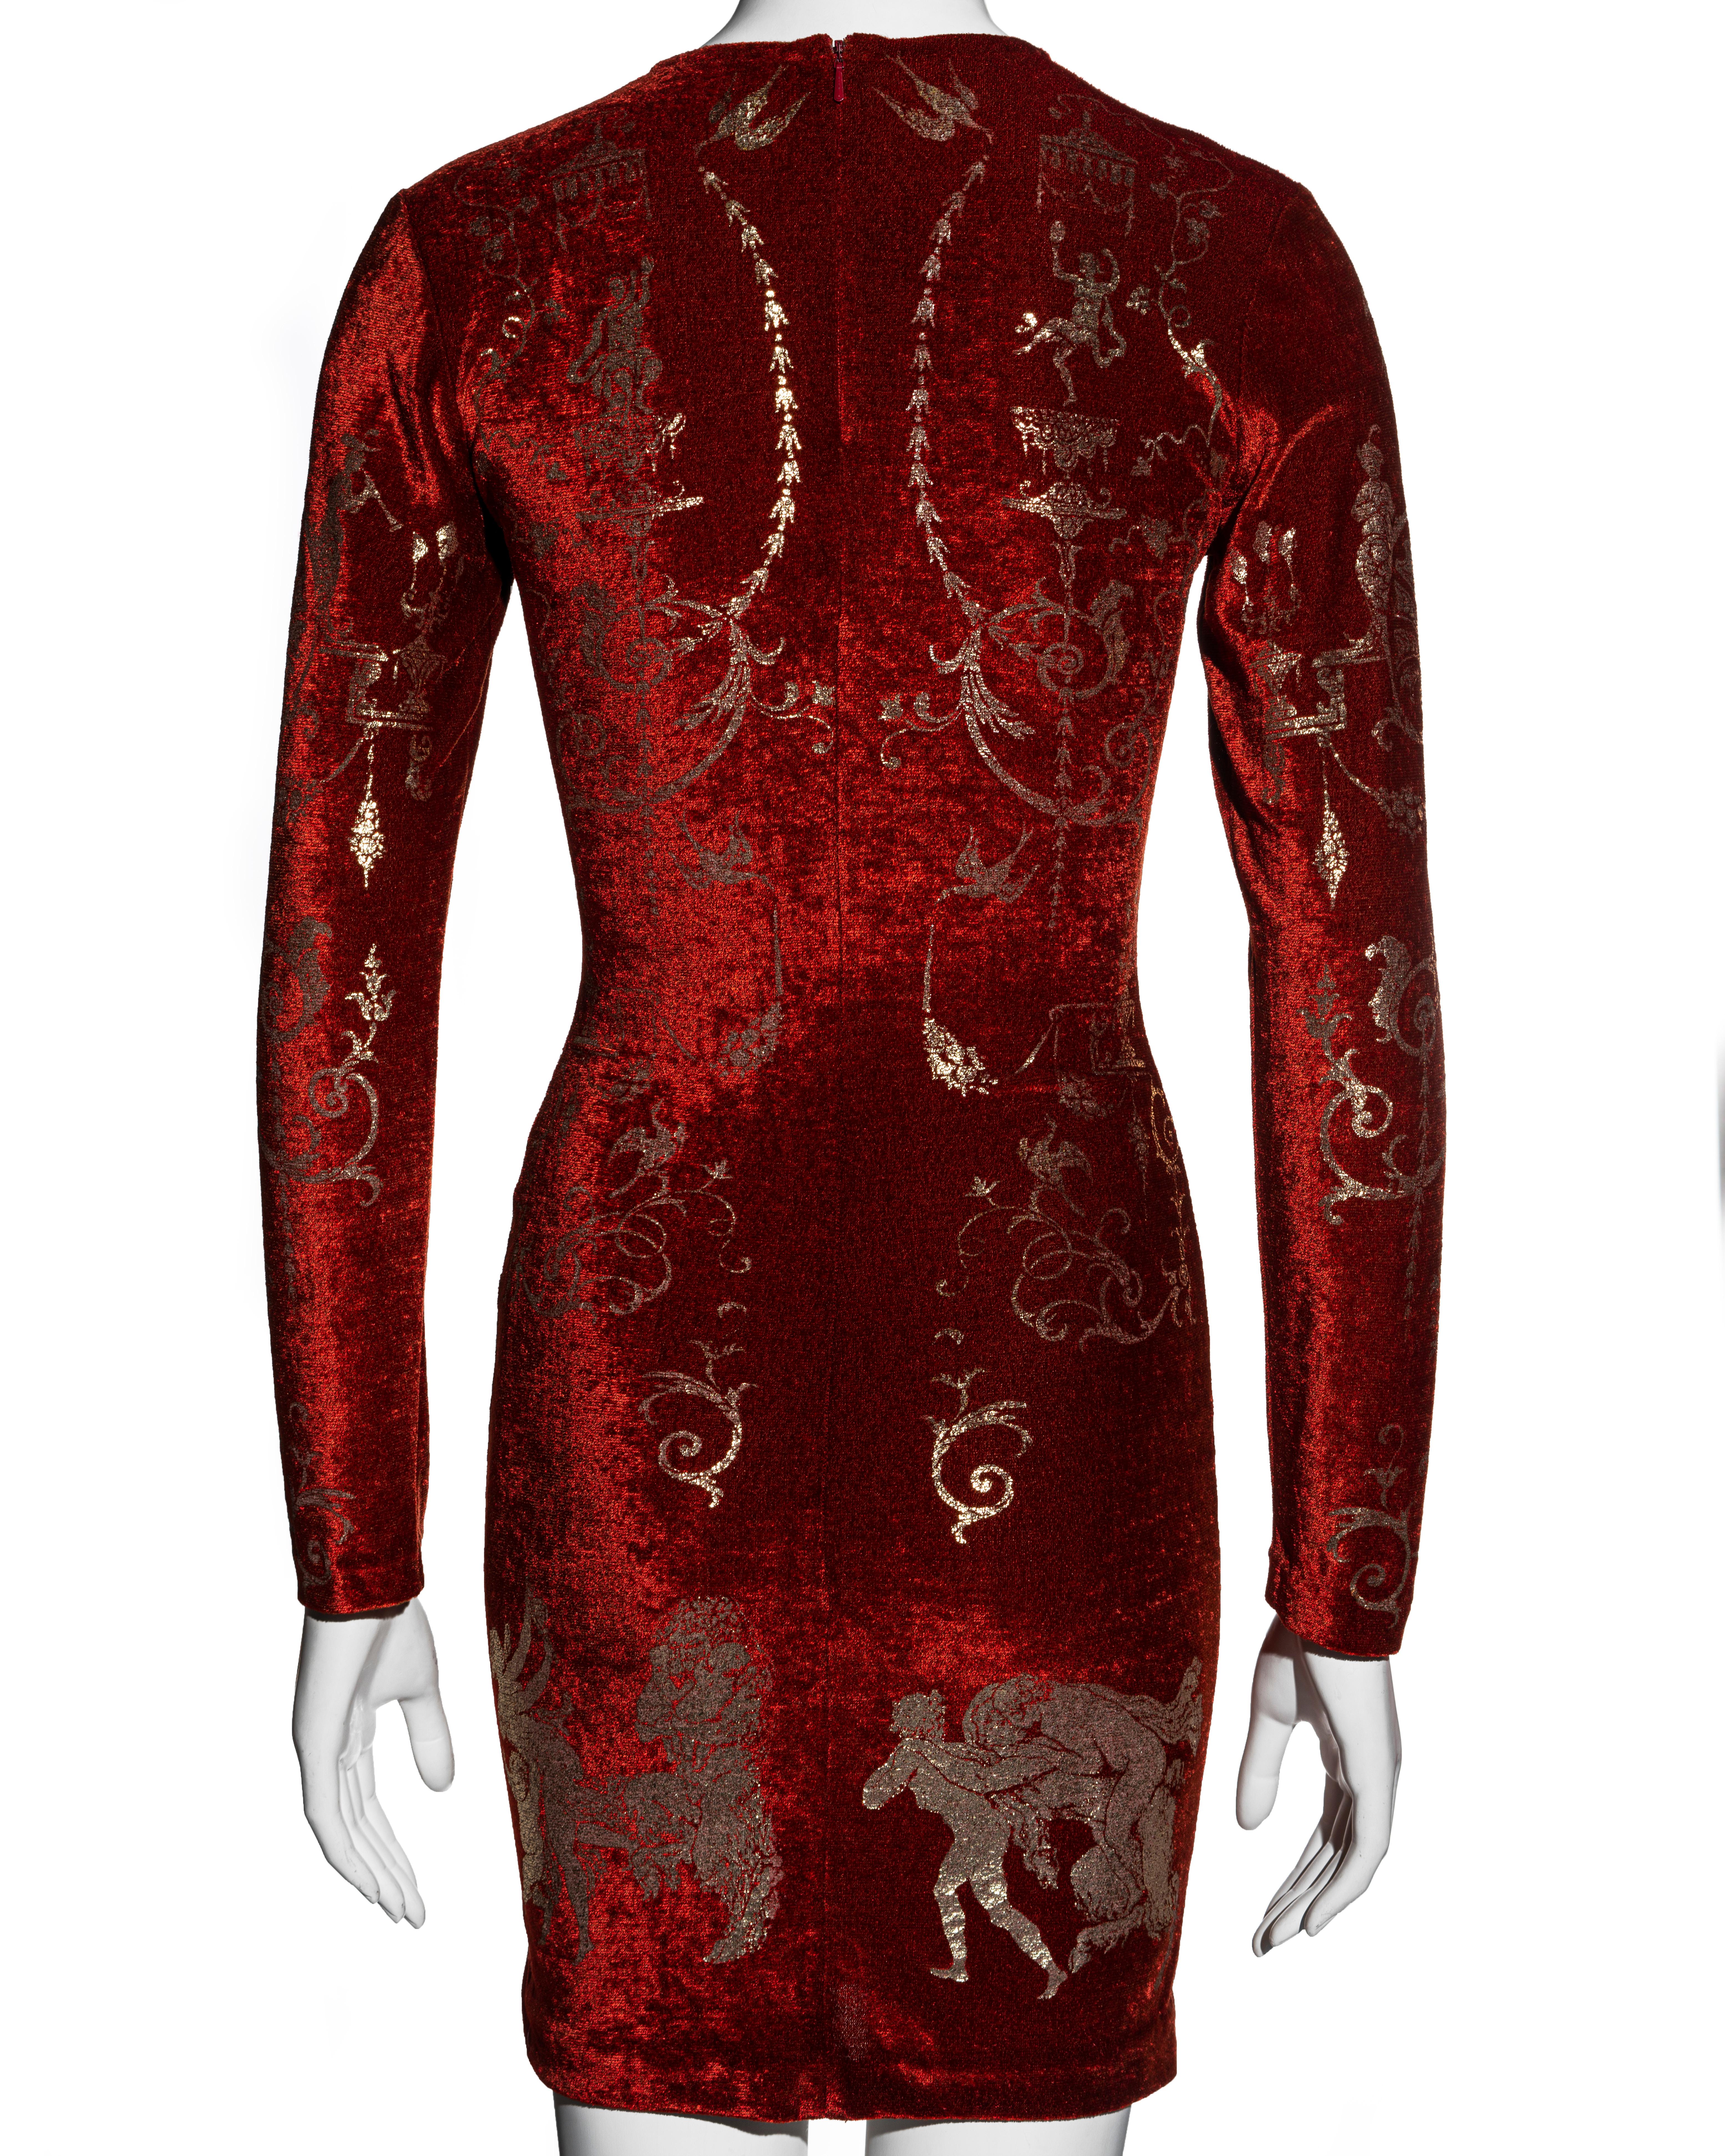 Vivienne Westwood red velvet bodycon dress with gold foil print, fw 1991 1